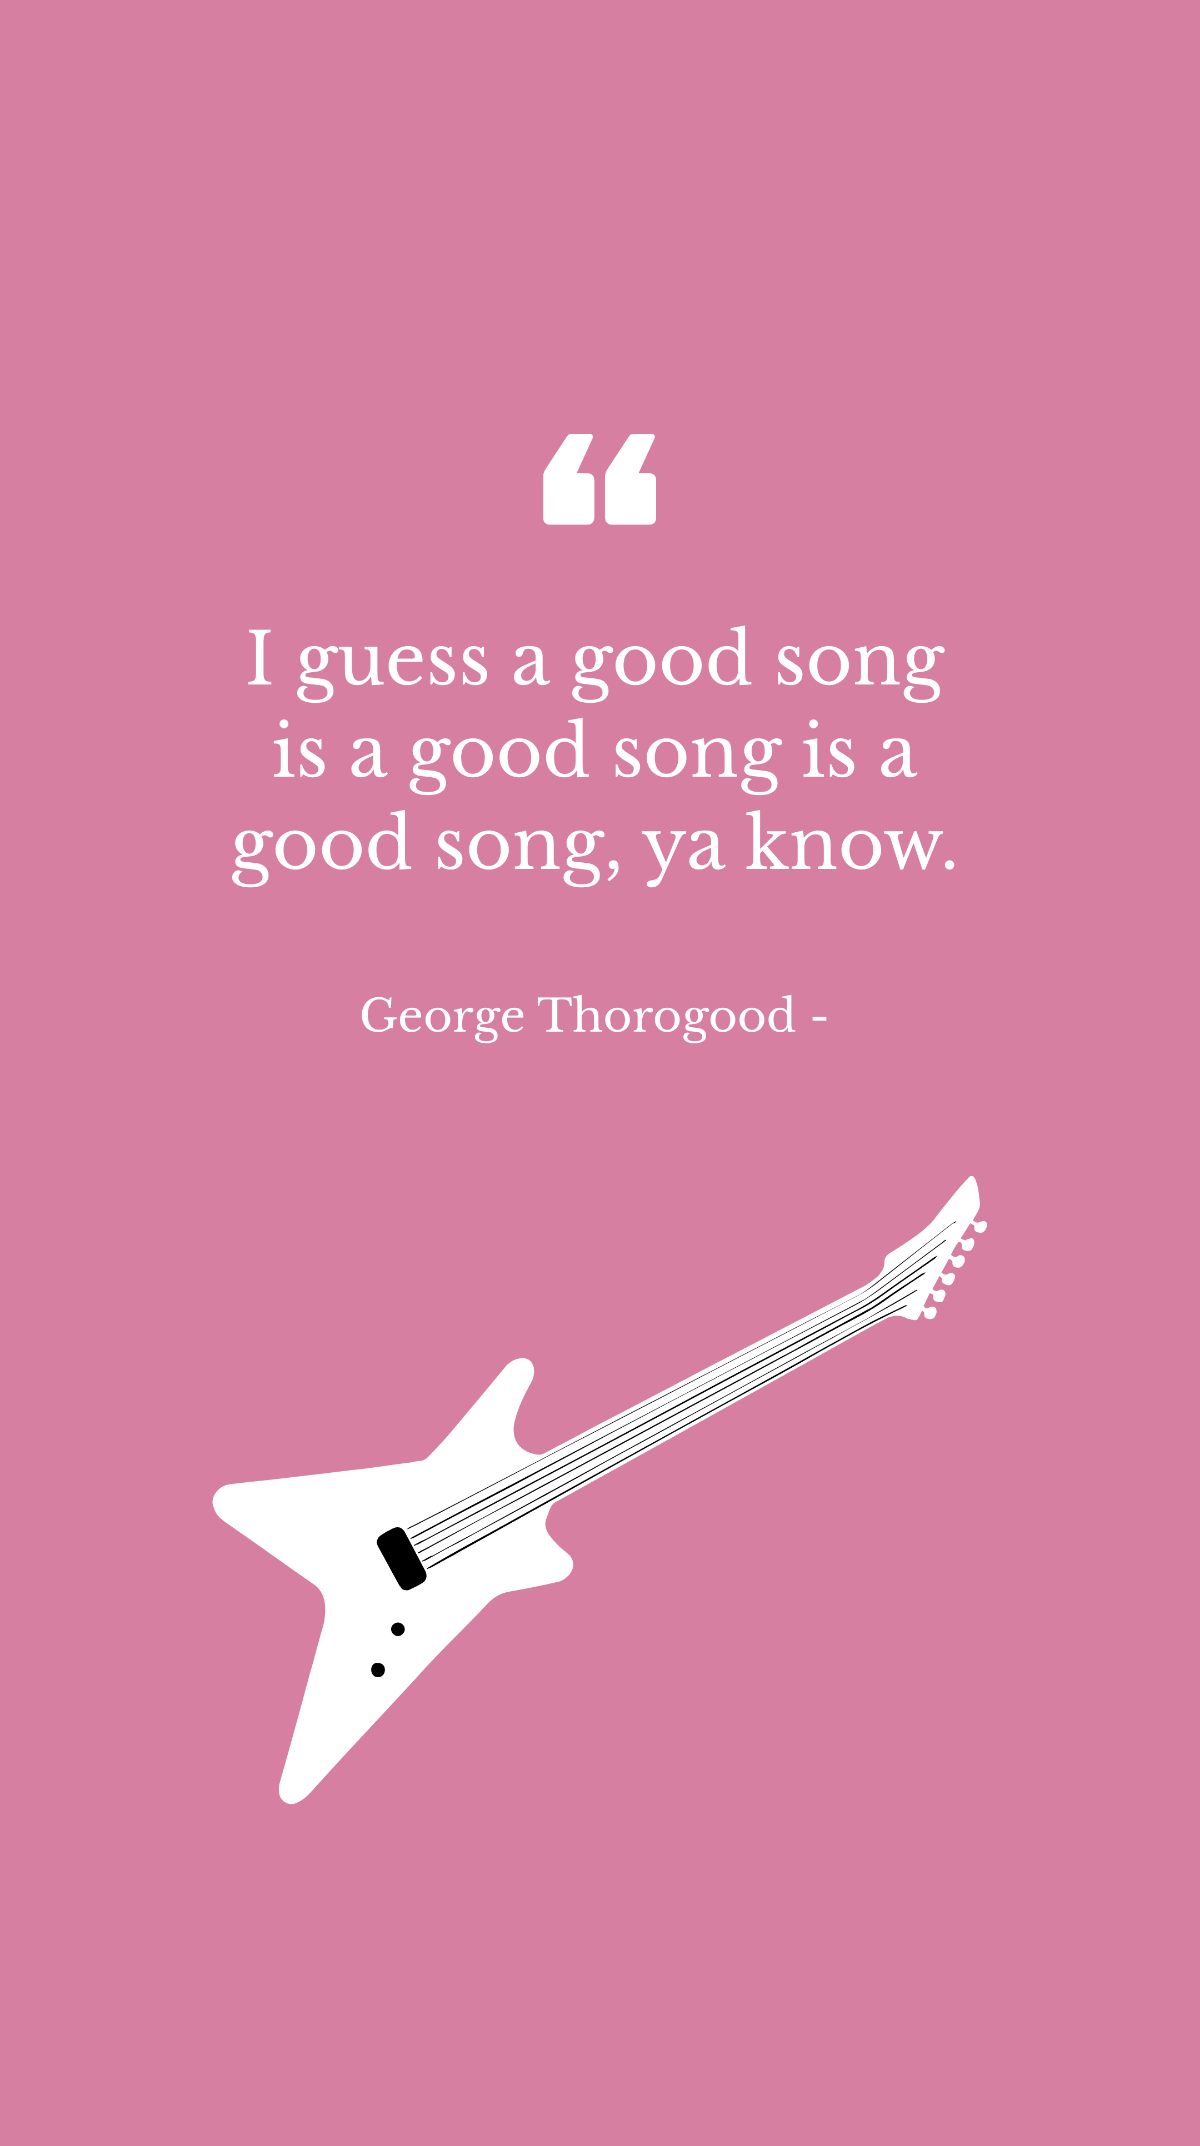 George Thorogood - I guess a good song is a good song is a good song, ya know. Template